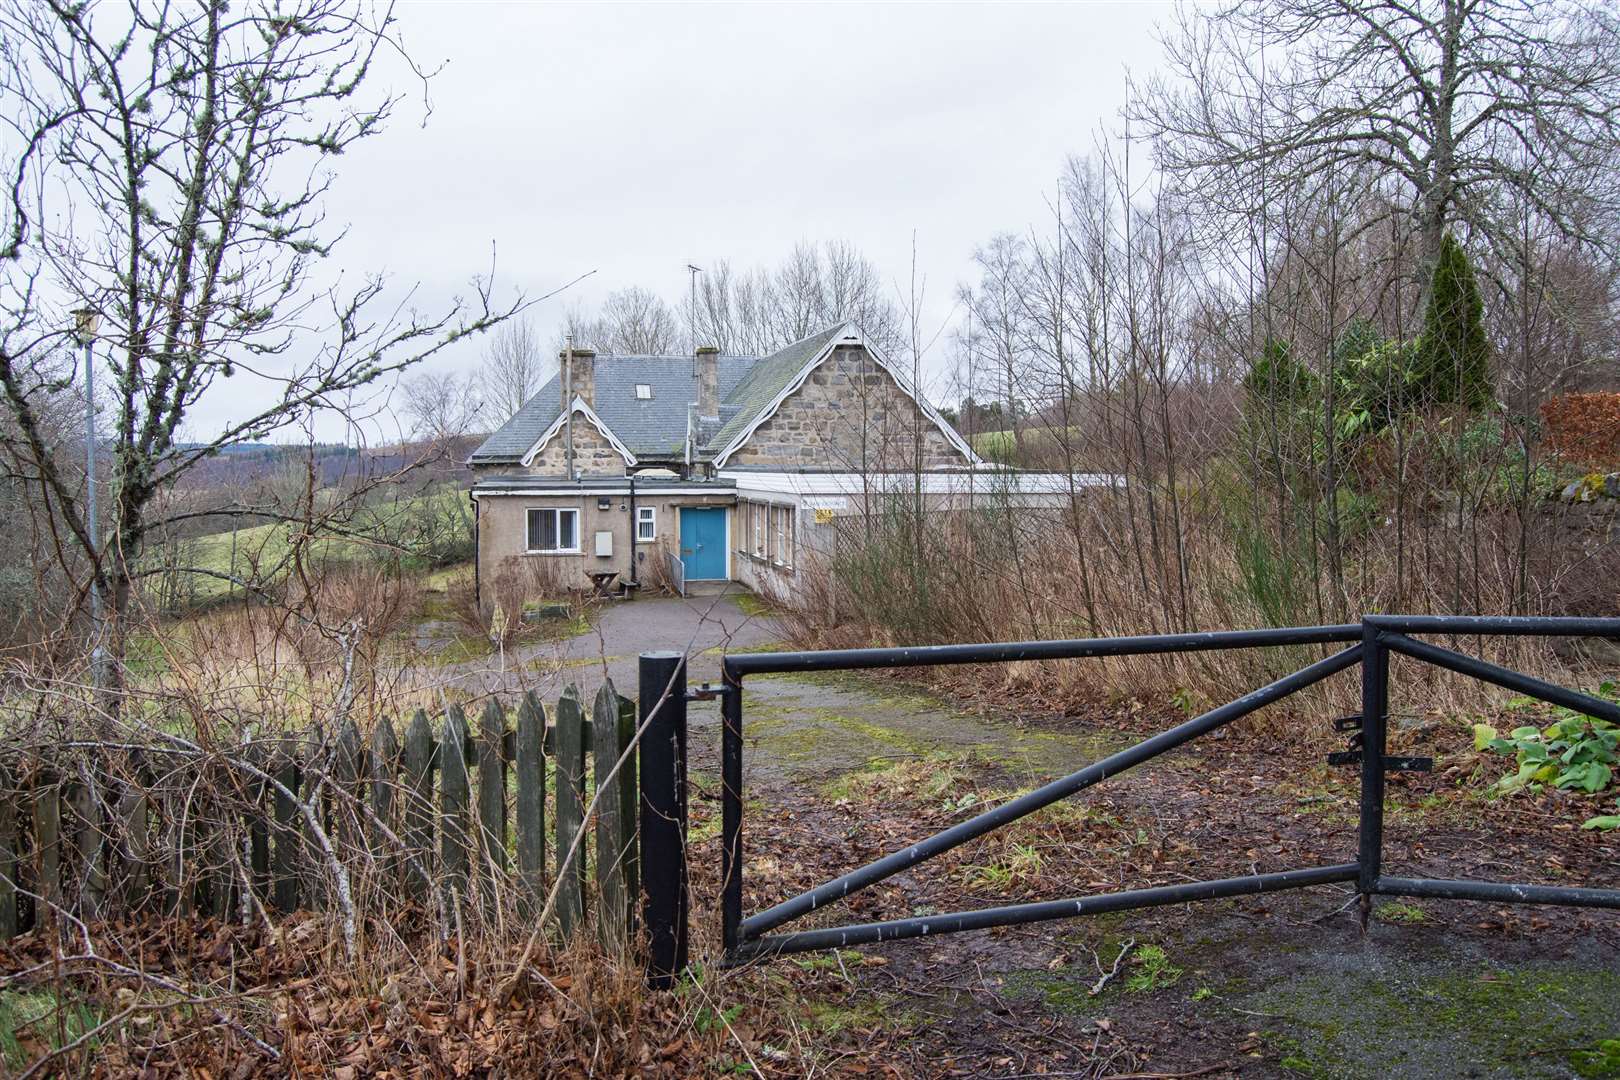 Closure is potentially looming for Inveravon Primary School in Ballindalloch. Picture: Daniel Forsyth